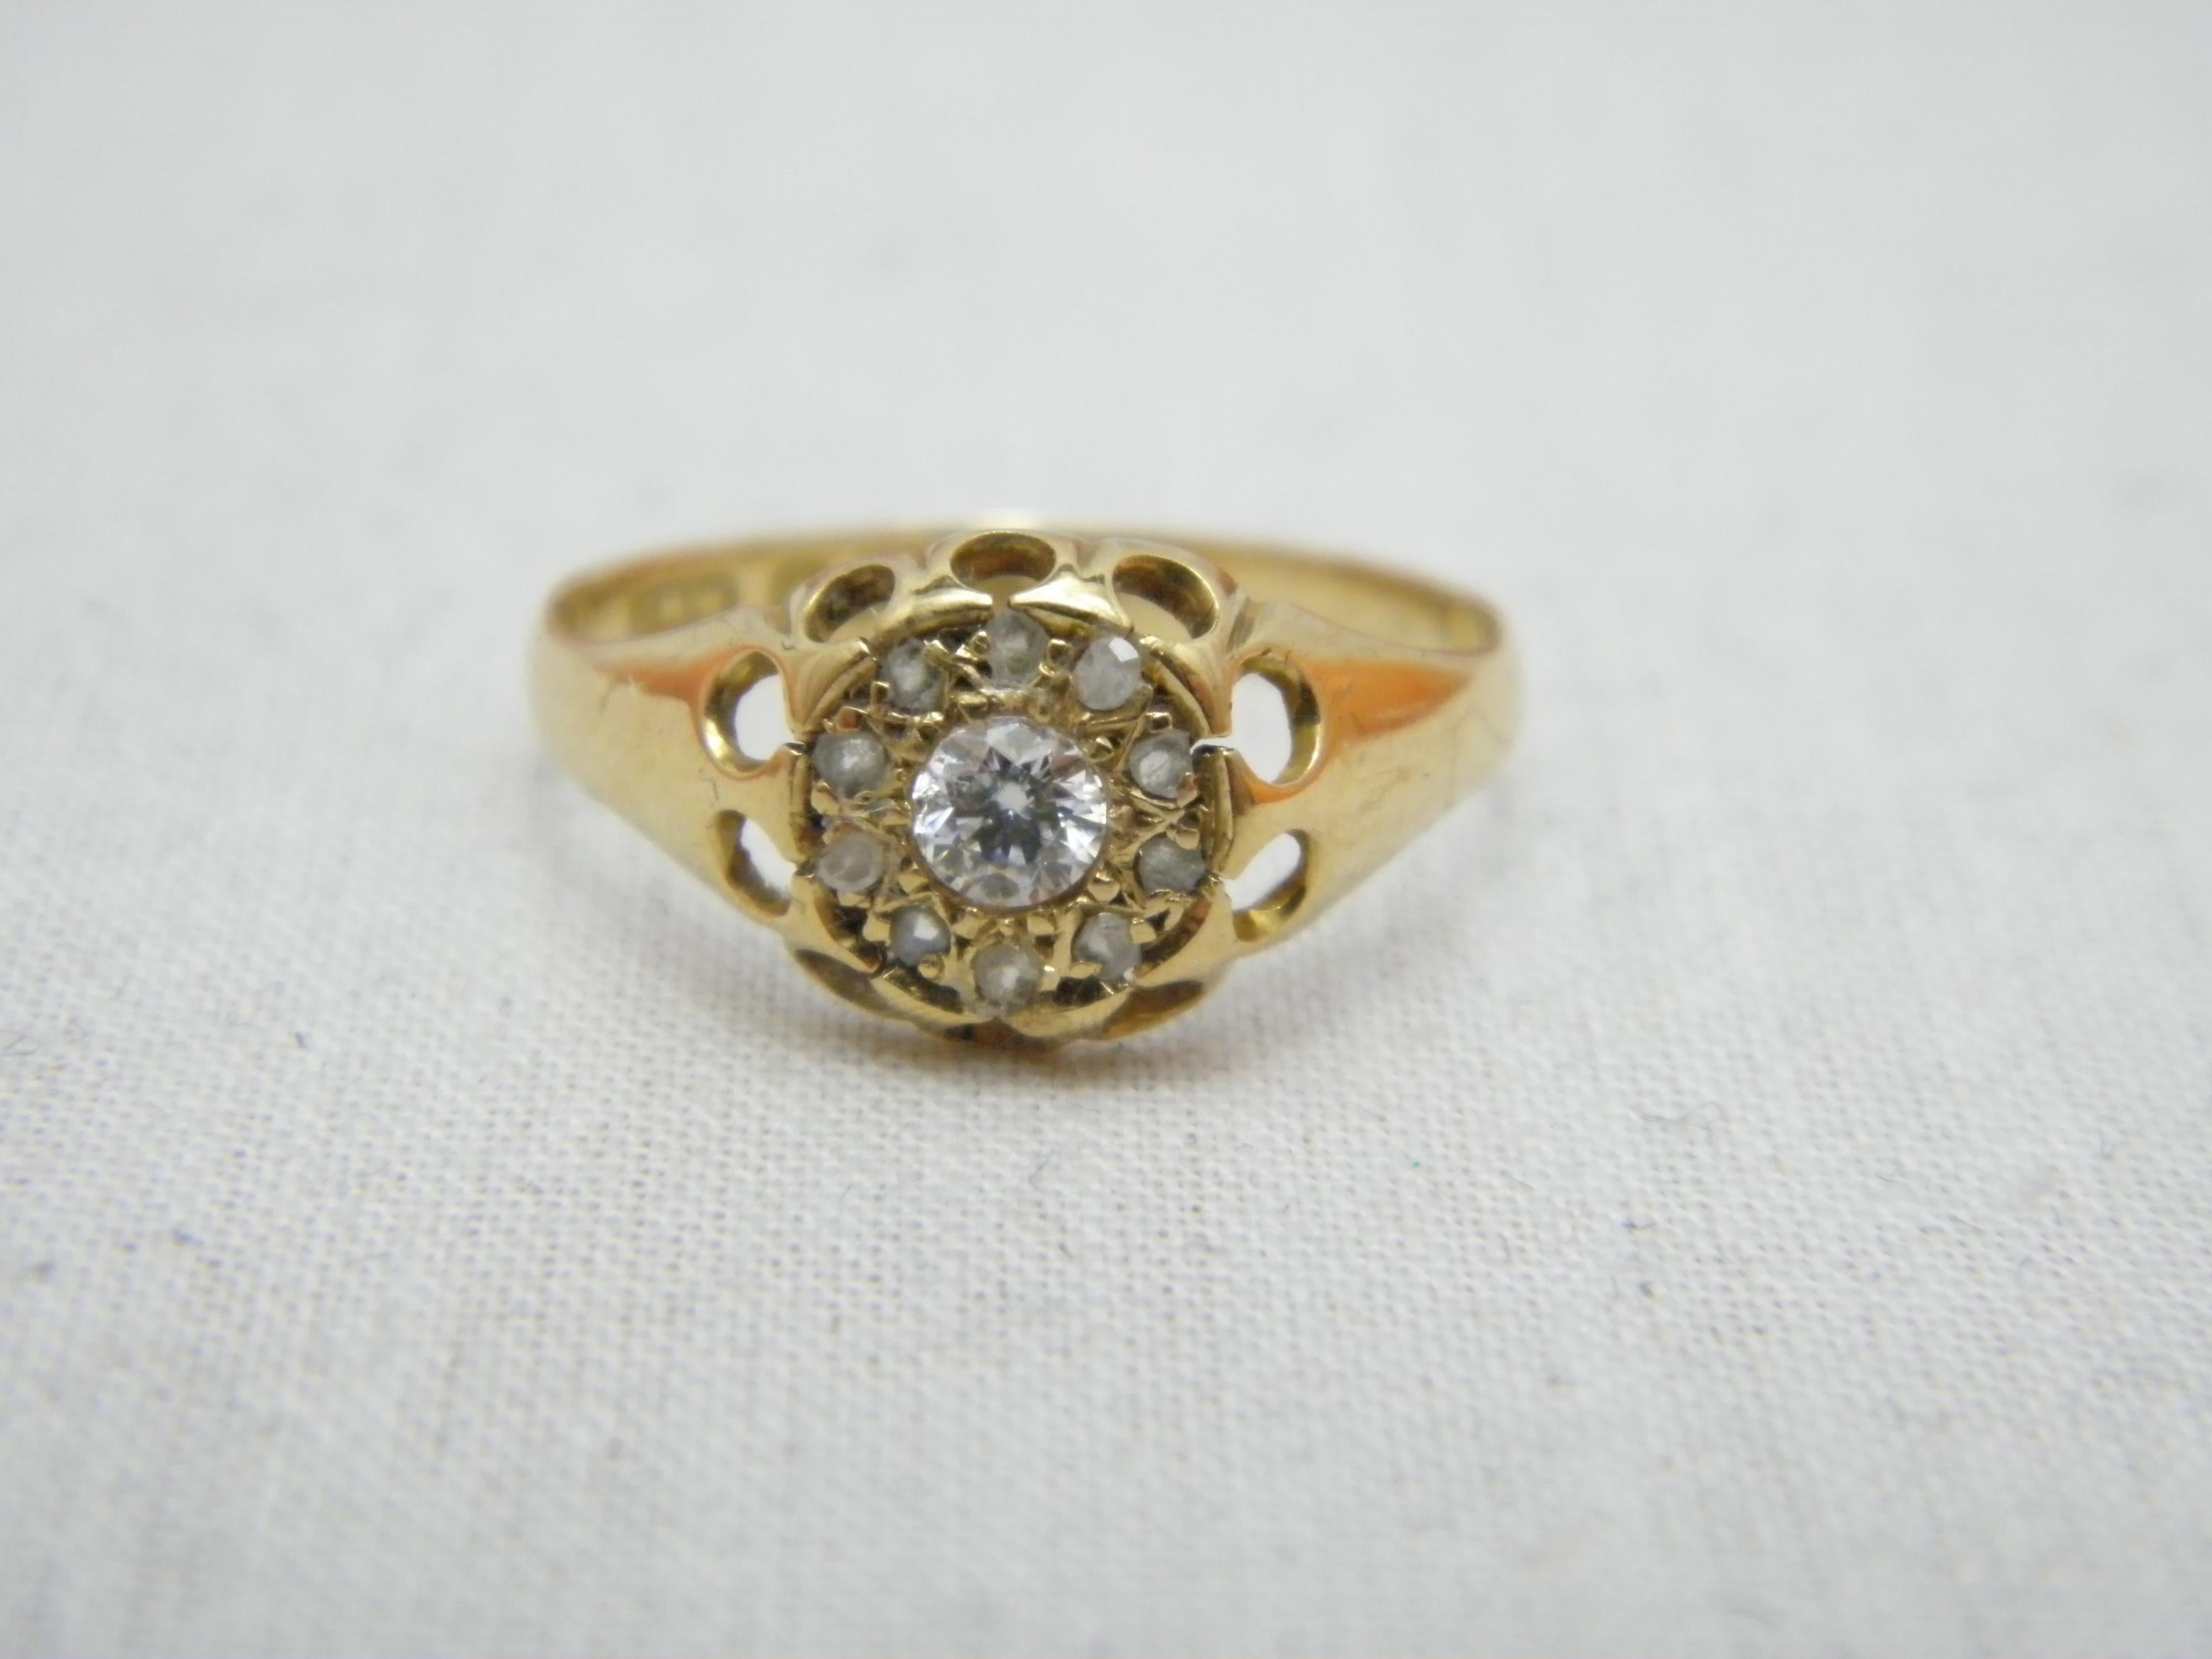 Cushion Cut Antique 18ct Gold Diamond Halo Cluster Gypsy Ring Size N 6.75 750 Purity Chester For Sale